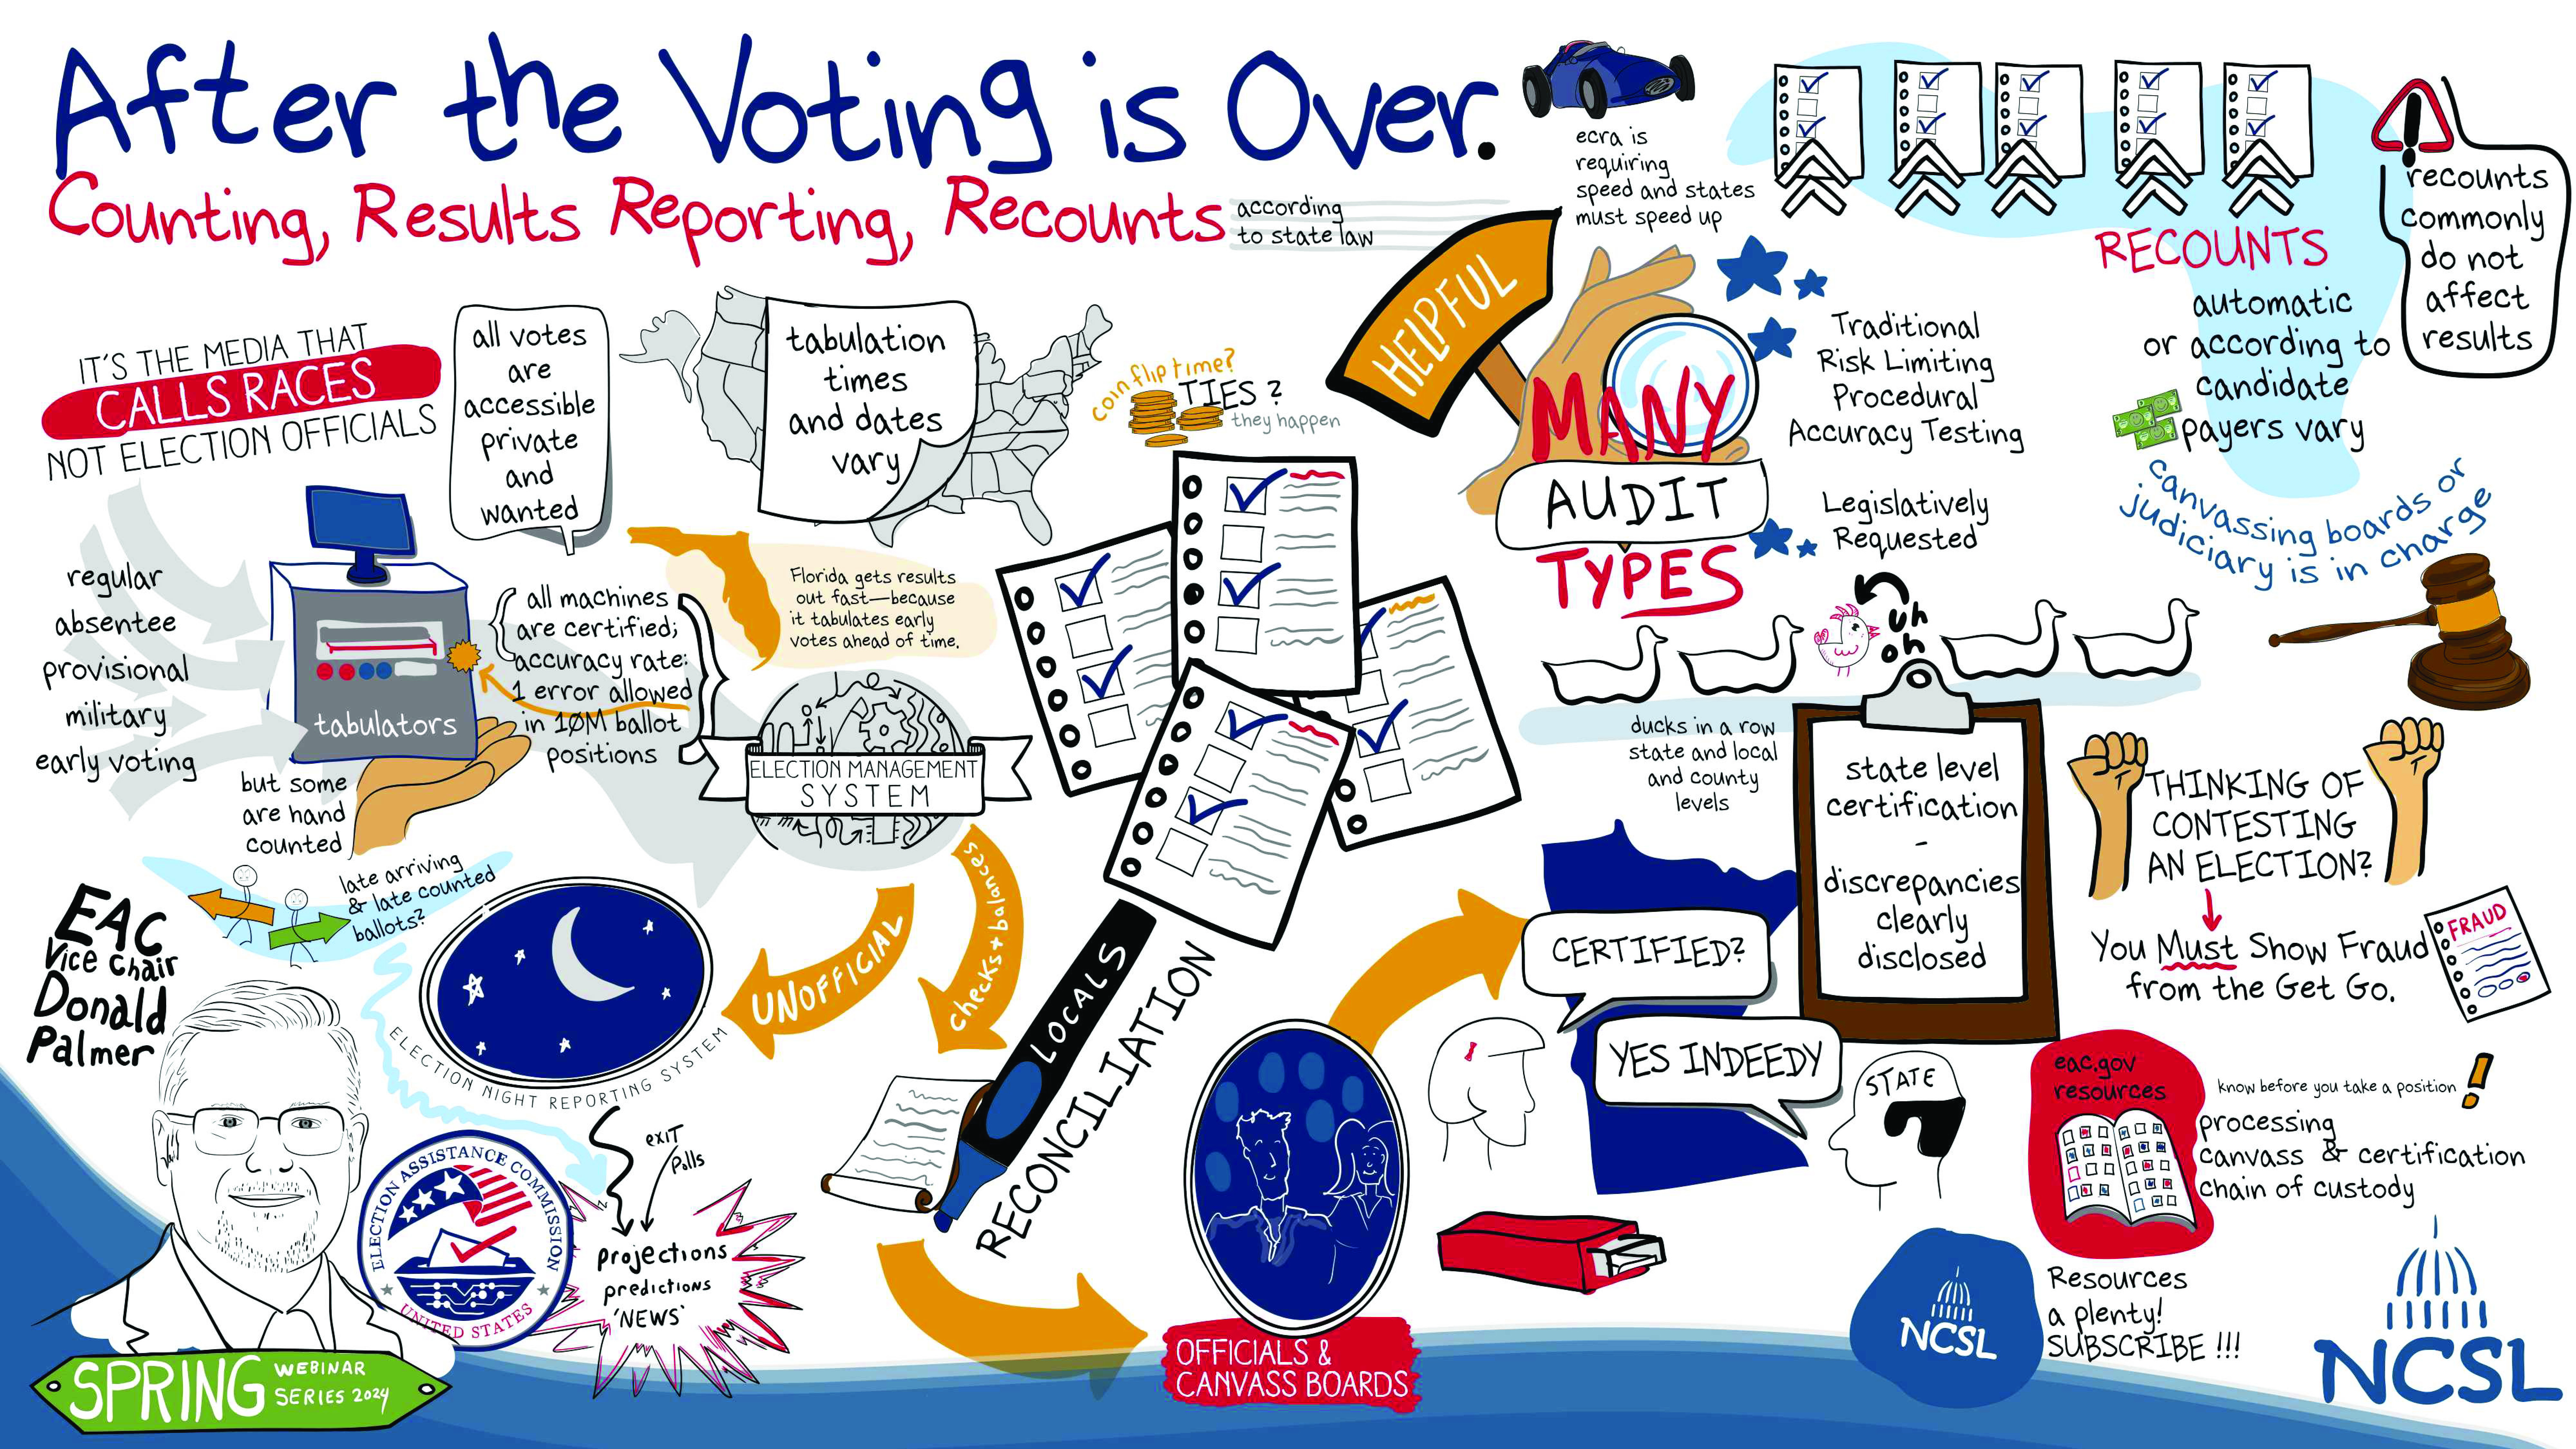 When the Voting Is Over illustration